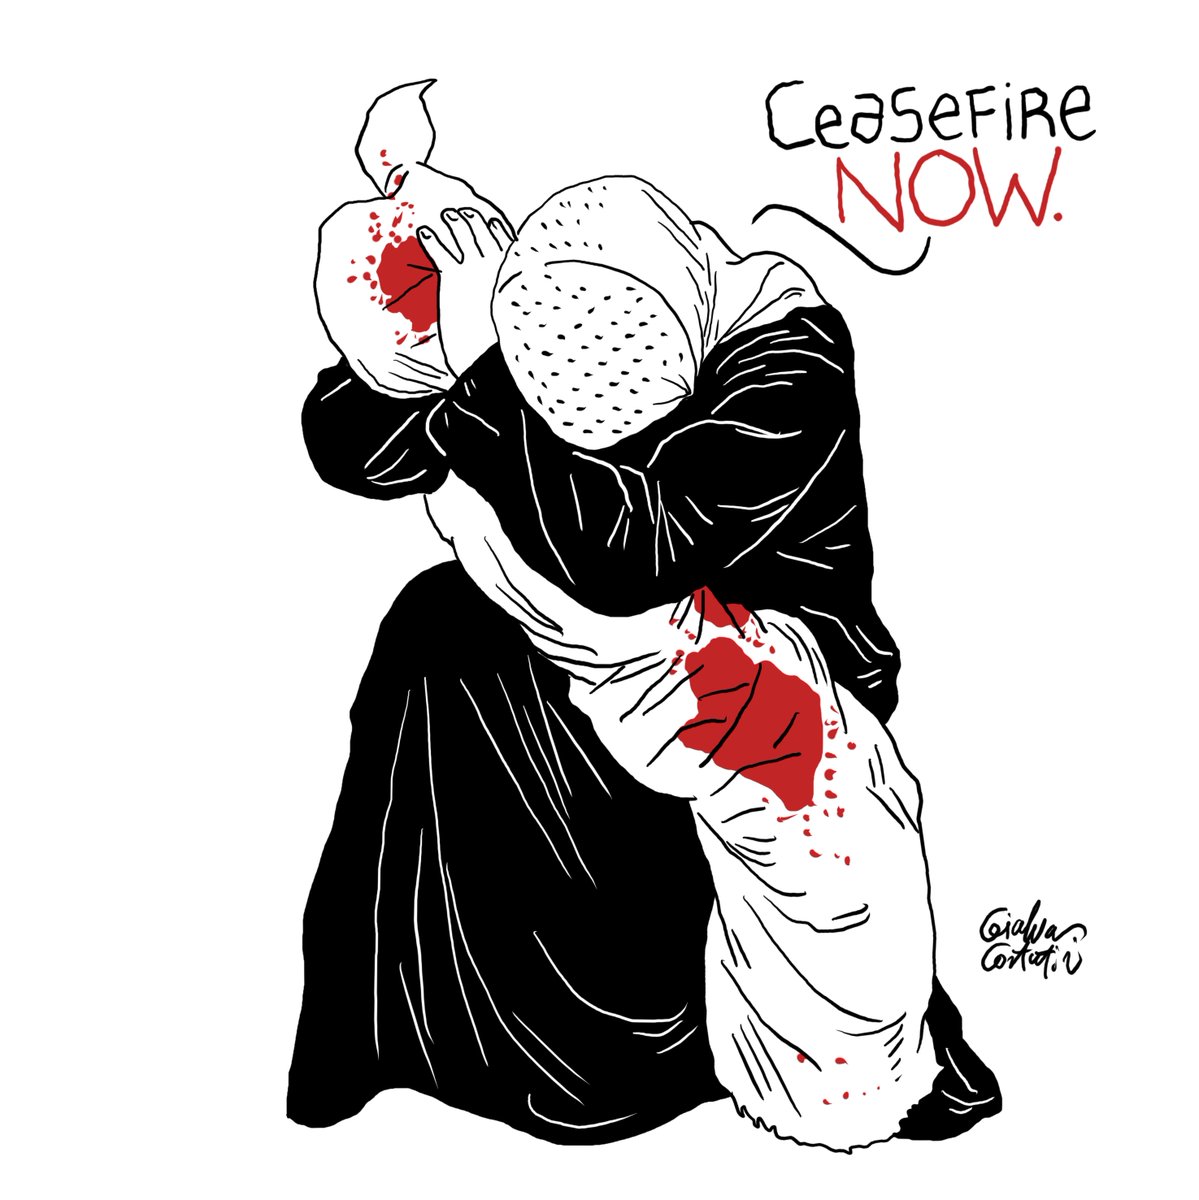 The first drawing I made after October 7th was based on an incredible, heart-wrenching, and beautiful photo. The photo was taken by Mohammed Salem @msalem66 on October 17, 2023, at Nasser Hospital in #Gaza, showing a woman, Inas Abu Maamar, embracing the lifeless body of Saly,